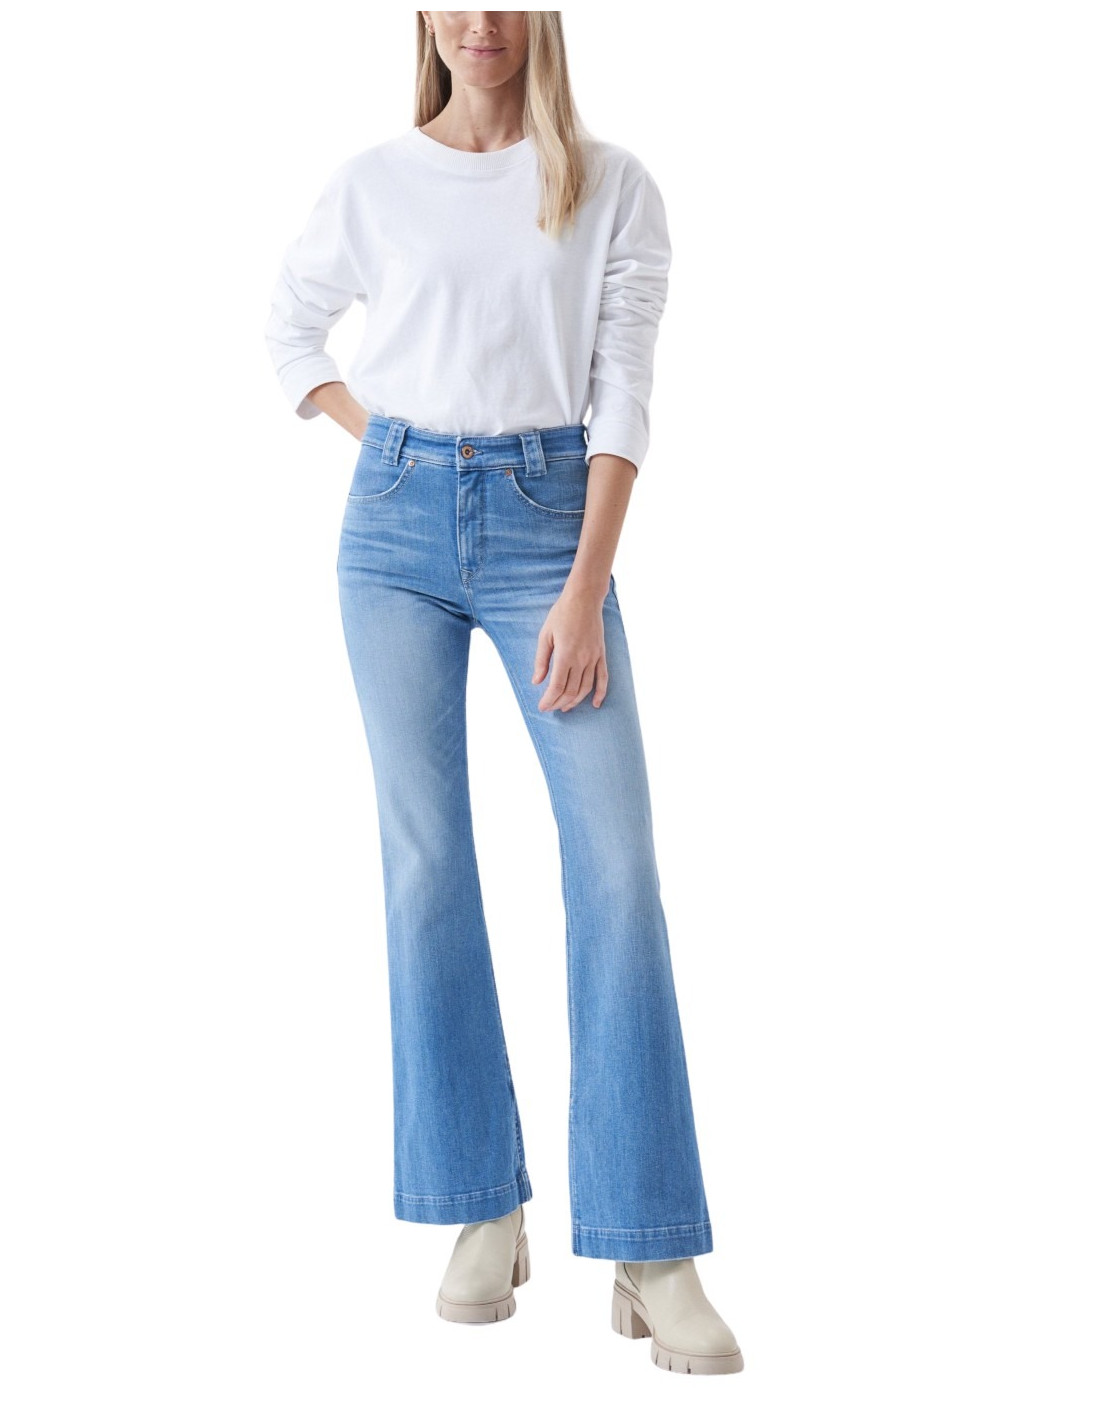 SALSA JEANS flare push in secret glamour claro para Mujer